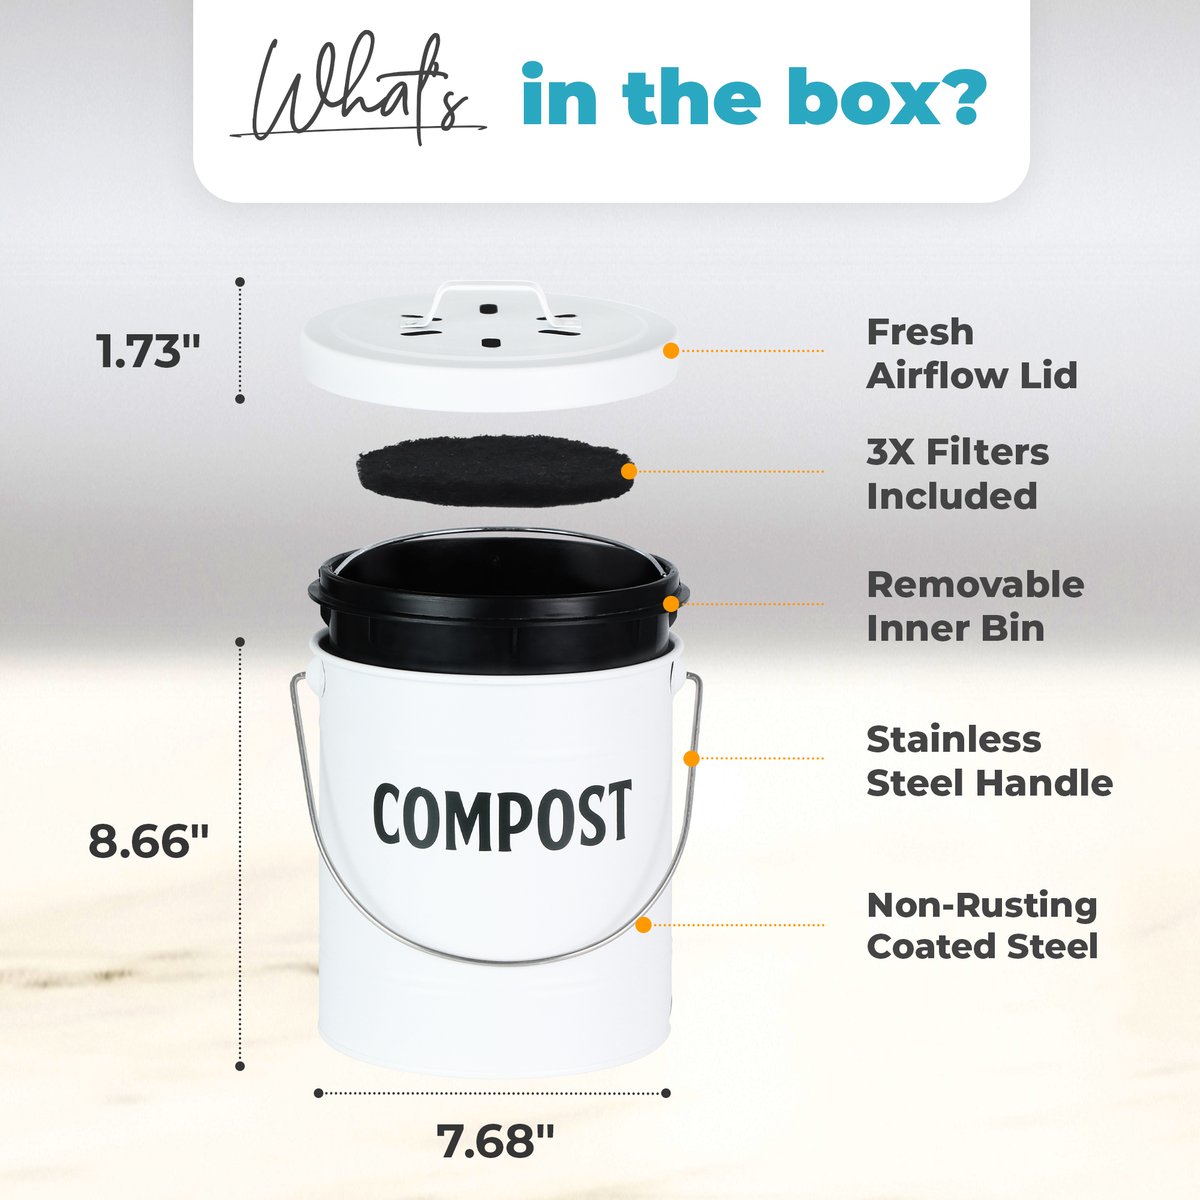 Compost Bin for Kitchen Counter by Saratoga Home - Family Sized, Silver